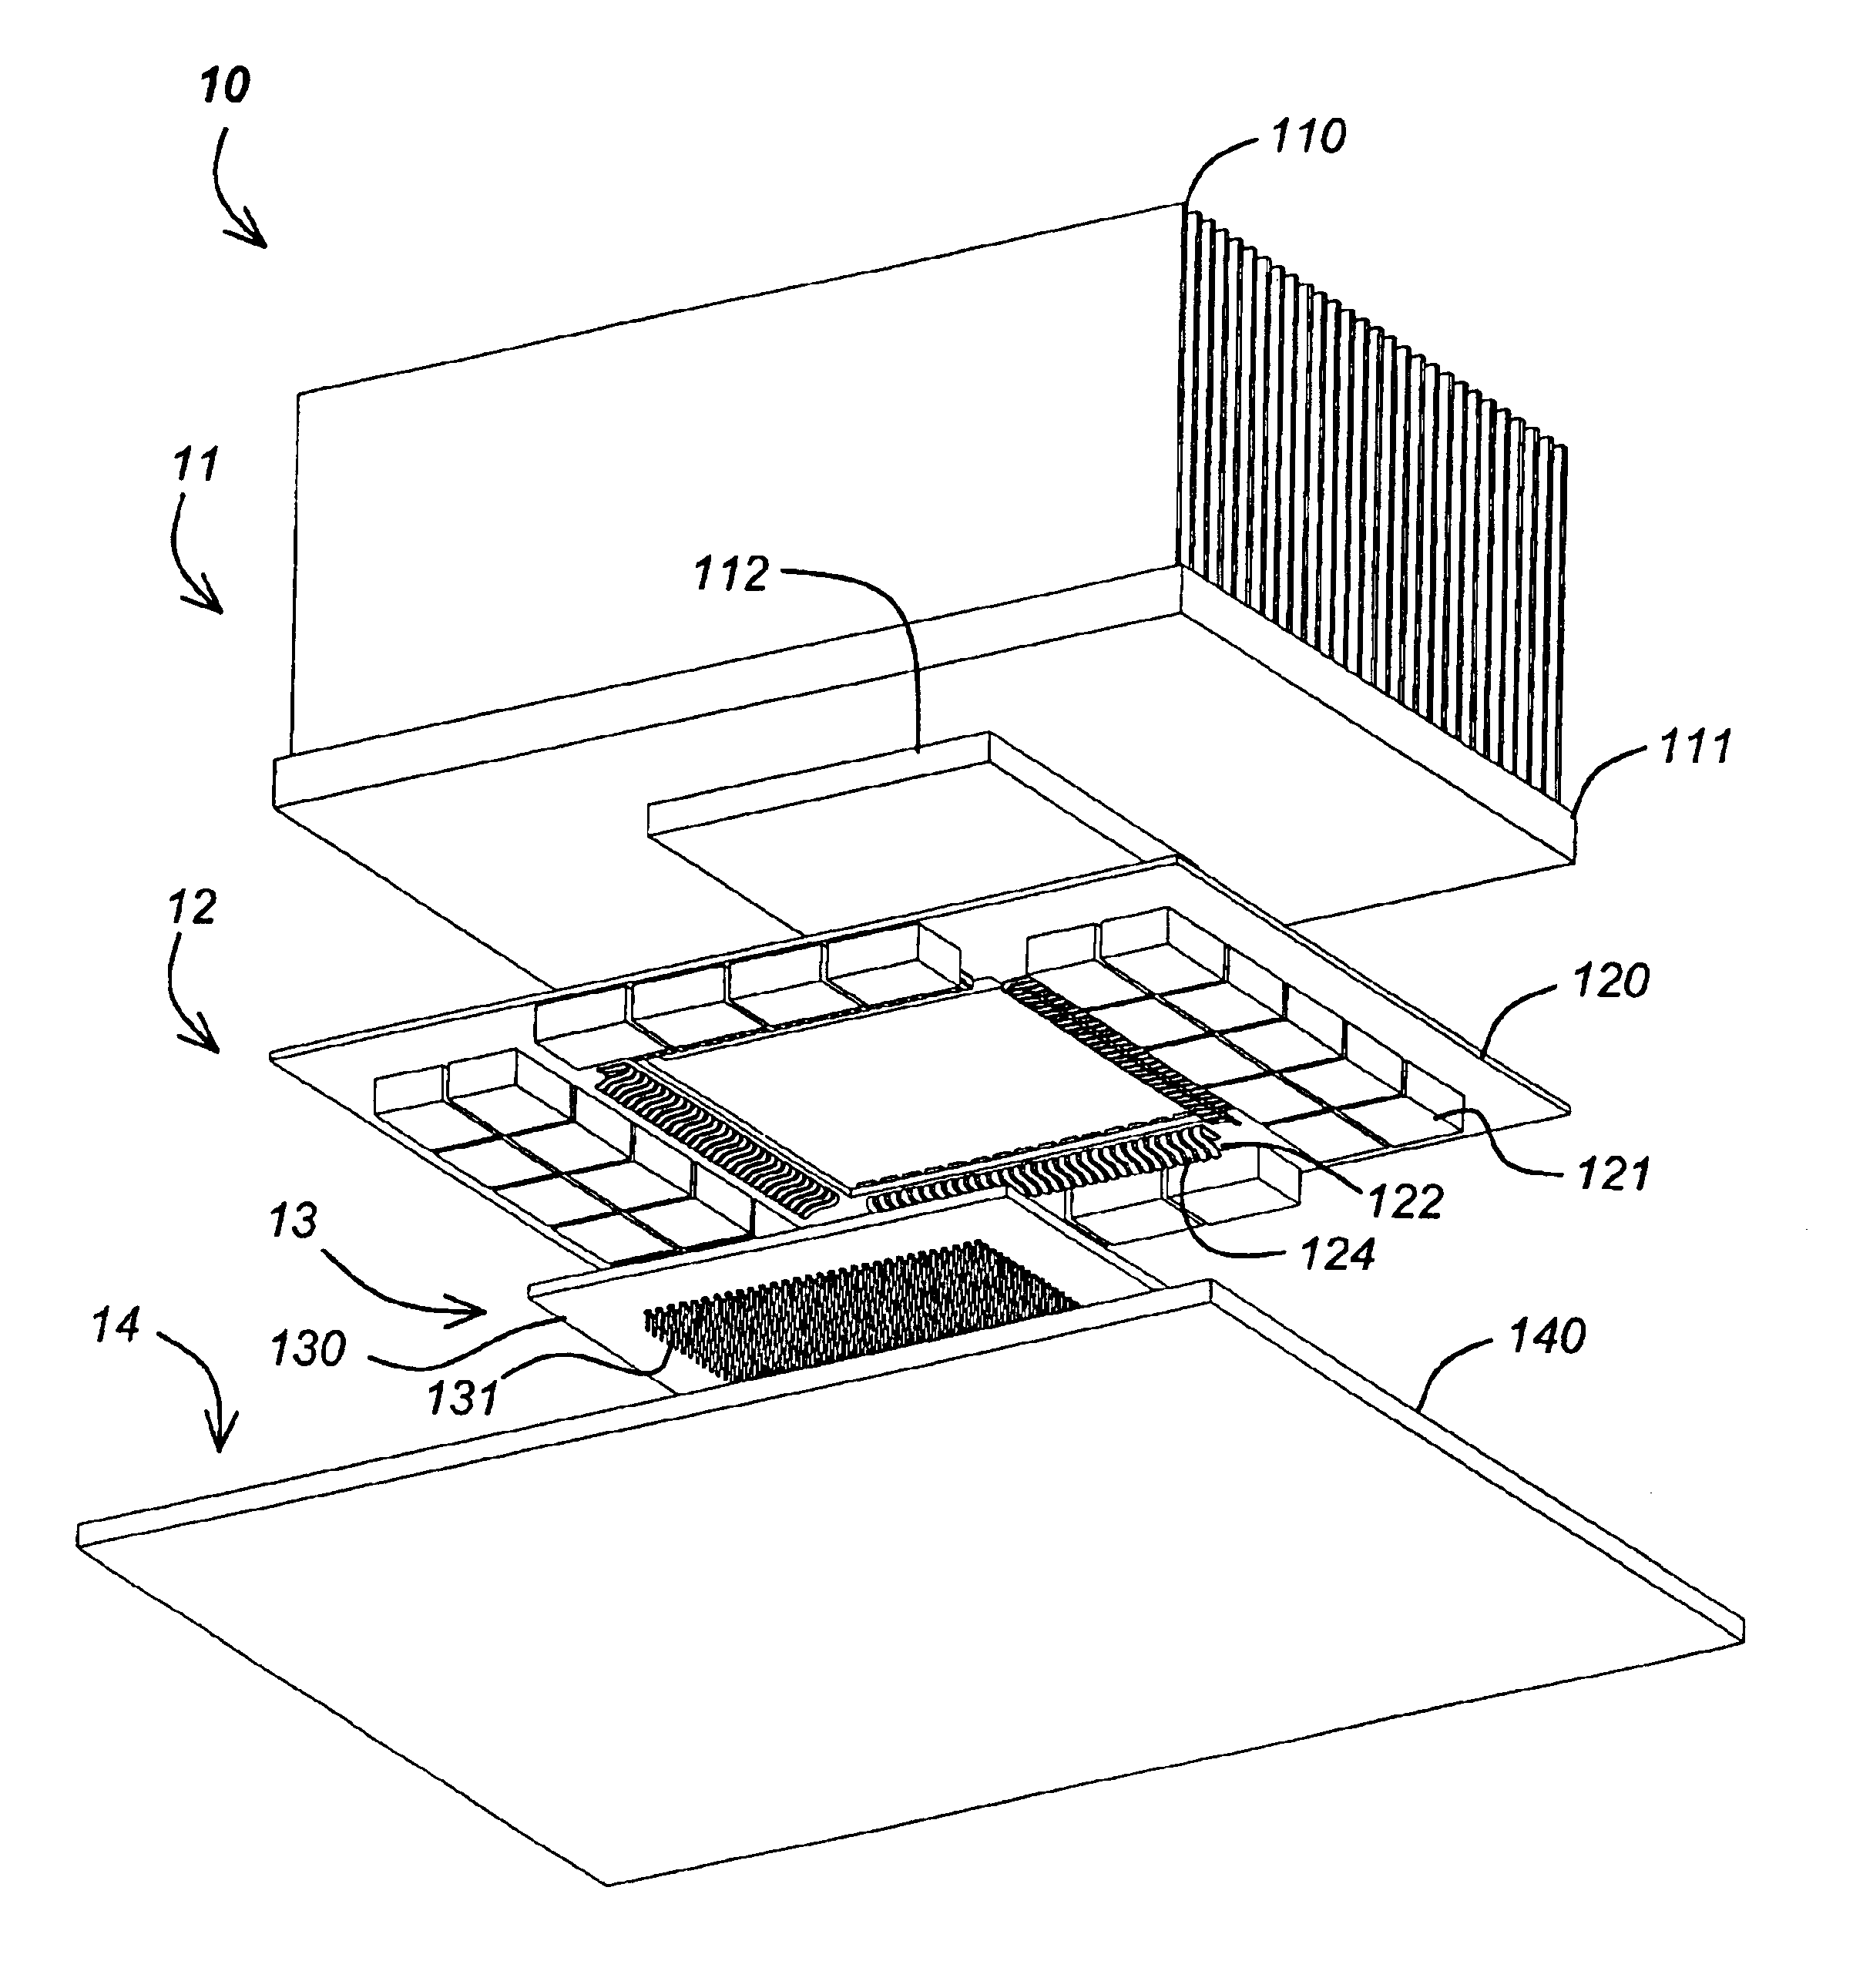 Ultra-low impedance power interconnection system for electronic packages